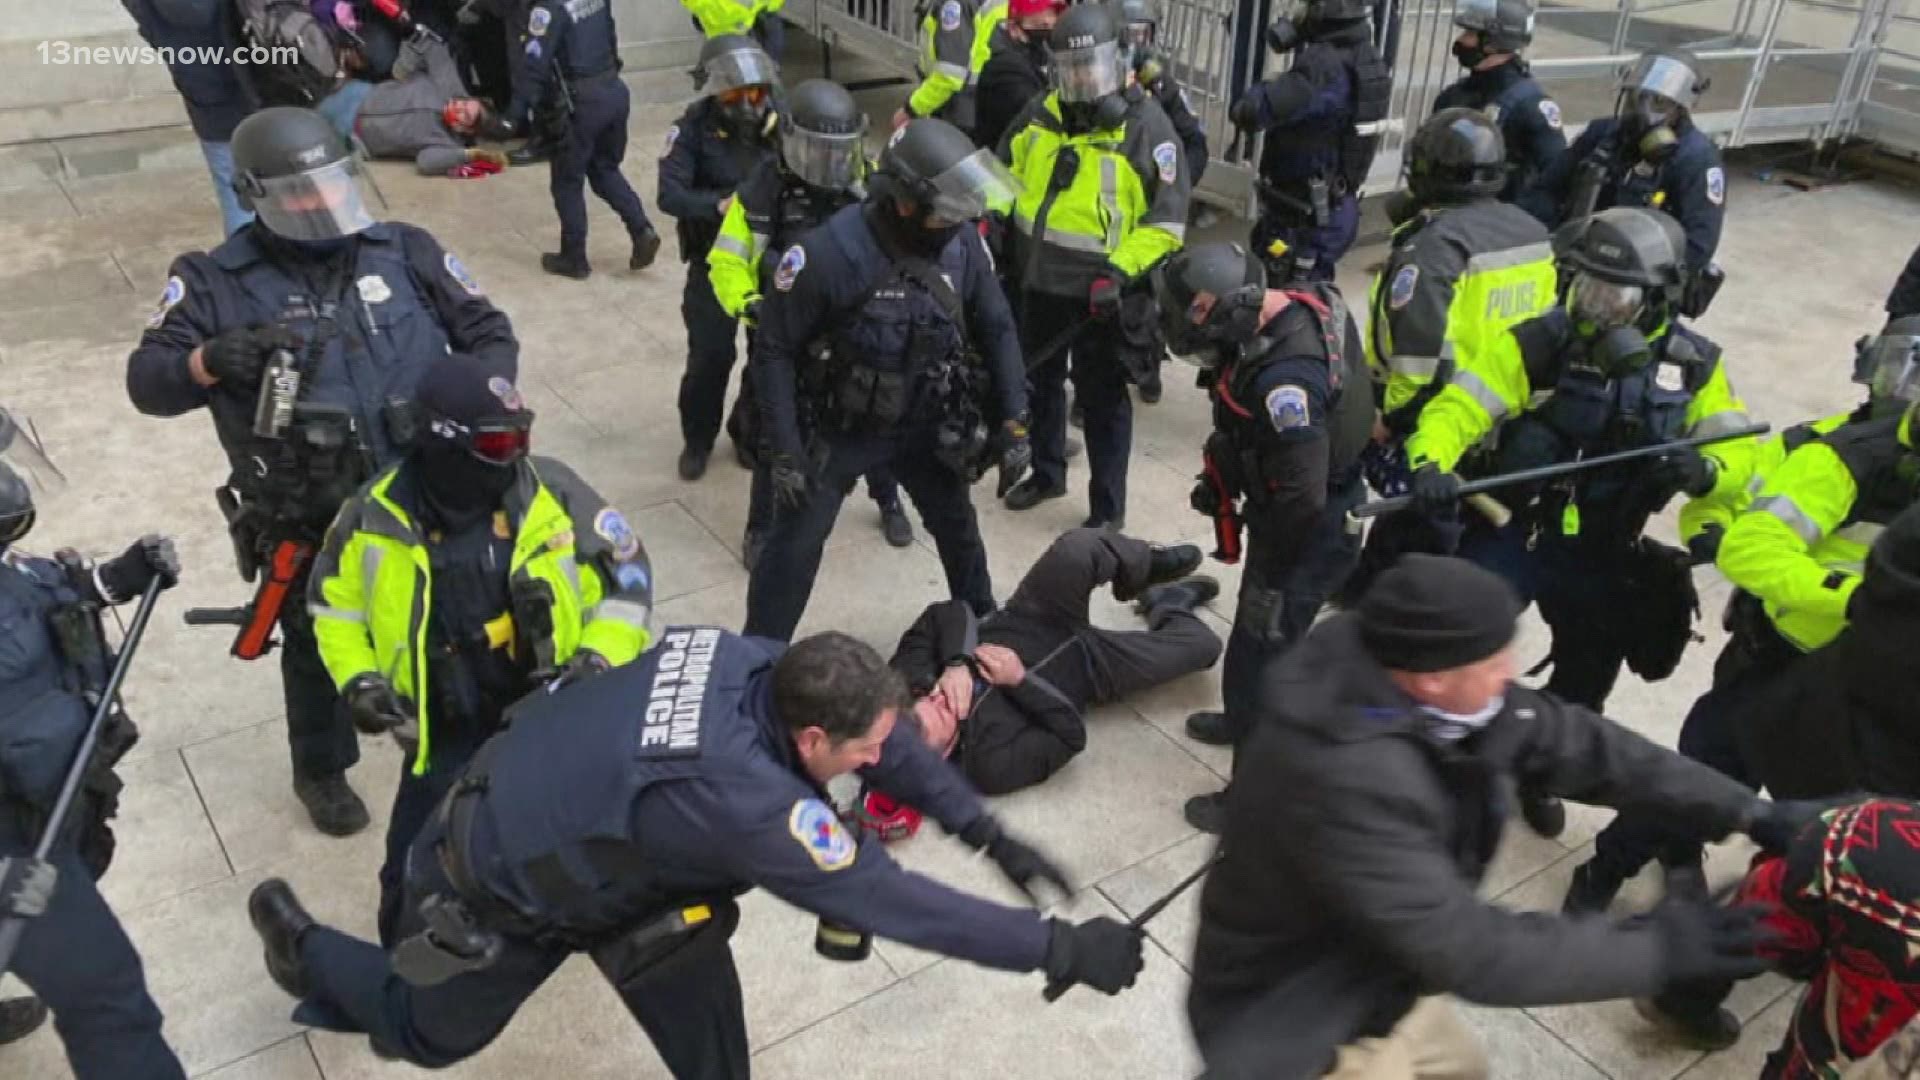 Metro Police recorded nearly 70 arrests in connection with the U.S. Capitol breach and earlier protests.